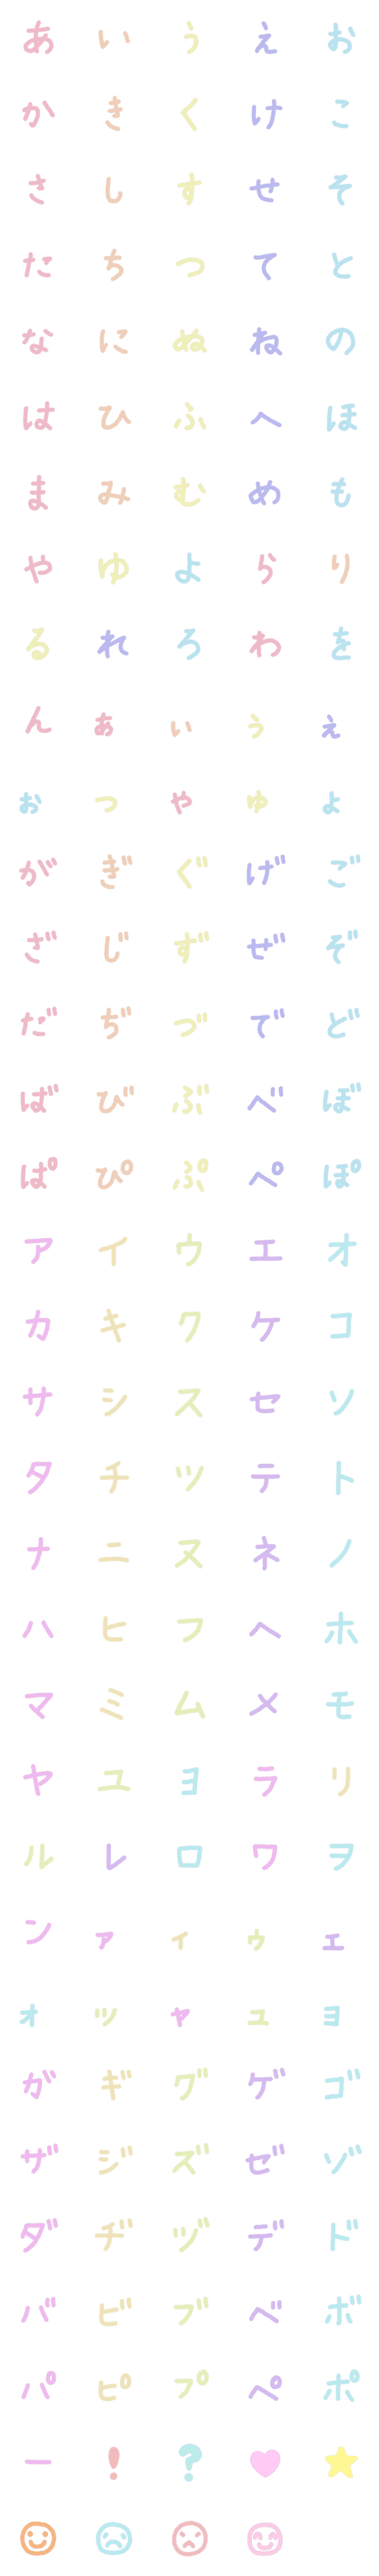 [LINE絵文字]動く シンプル デコ文字 絵文字の画像一覧